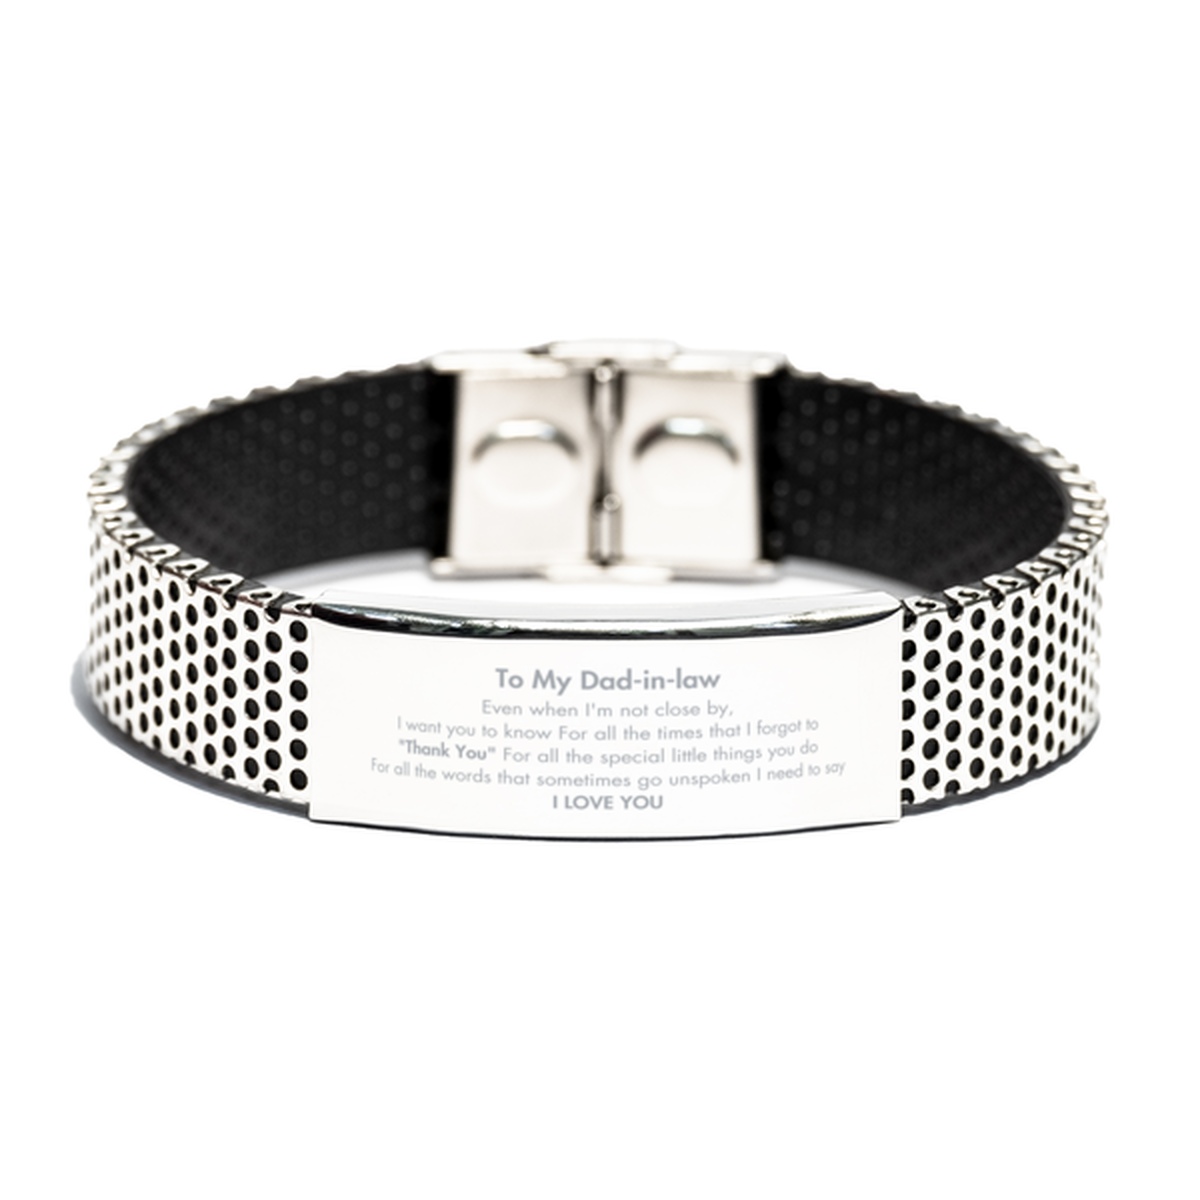 Thank You Gifts for Dad-in-law, Keepsake Stainless Steel Bracelet Gifts for Dad-in-law Birthday Mother's day Father's Day Dad-in-law For all the words That sometimes go unspoken I need to say I LOVE YOU